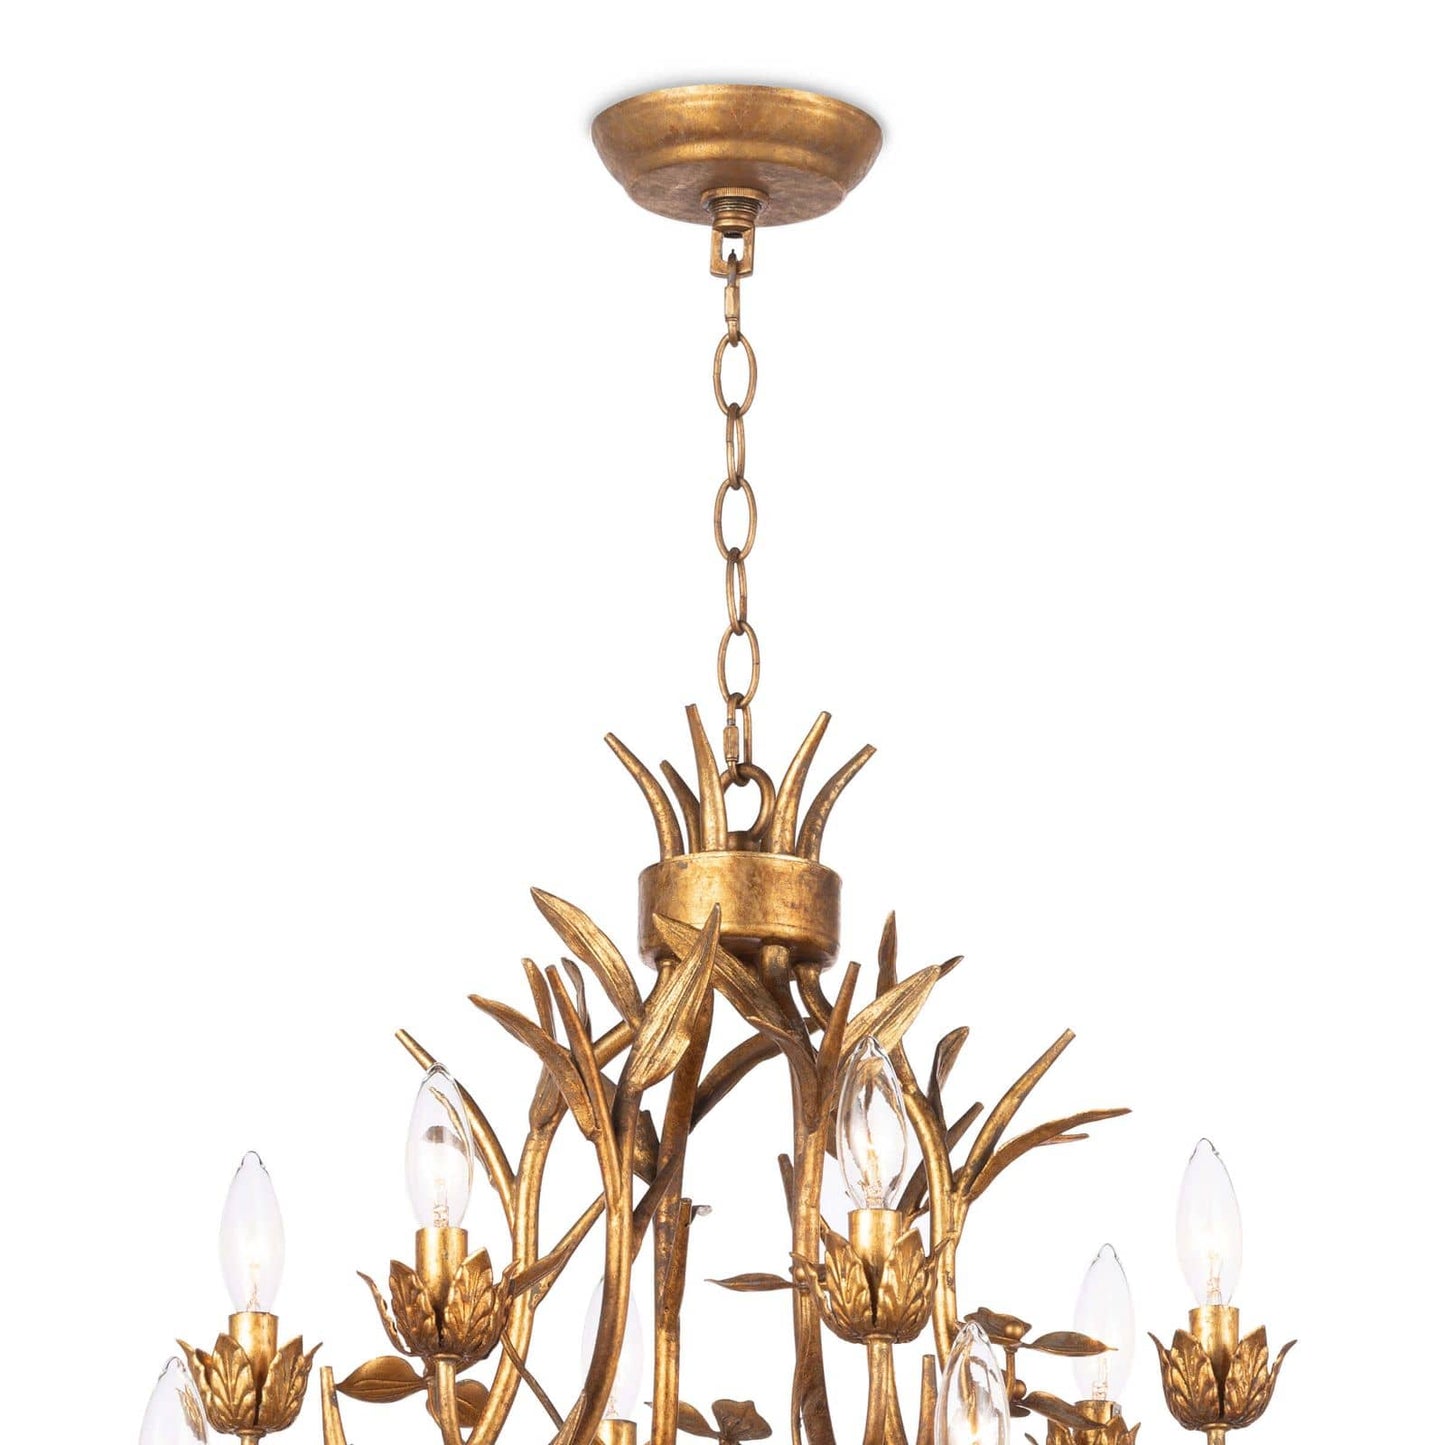 Trillium Chandelier by Southern Living